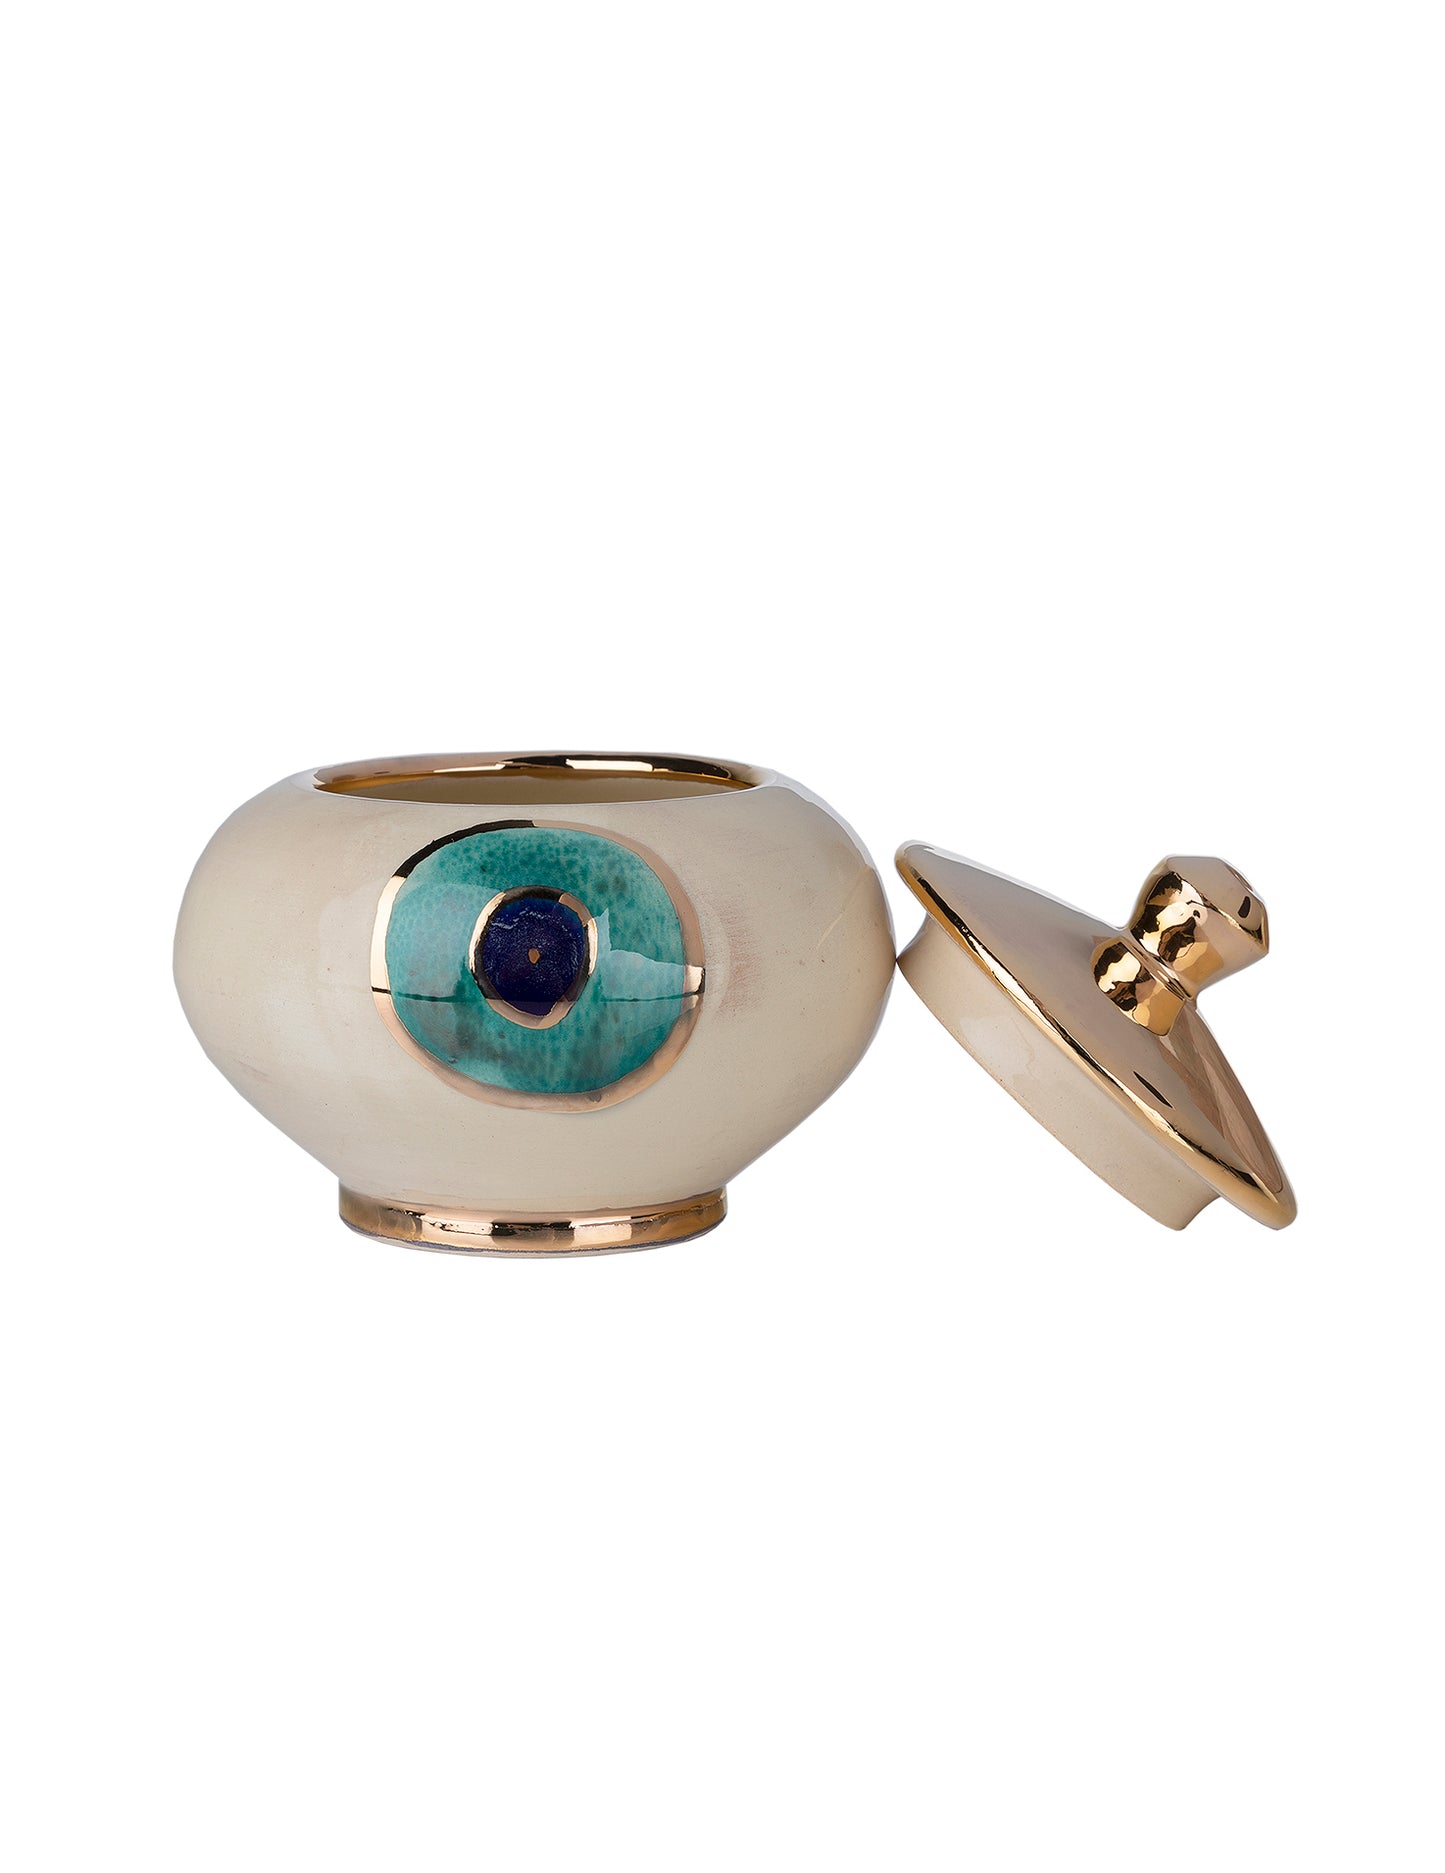 Evil Eye Candy Box With a Gold Plated lid